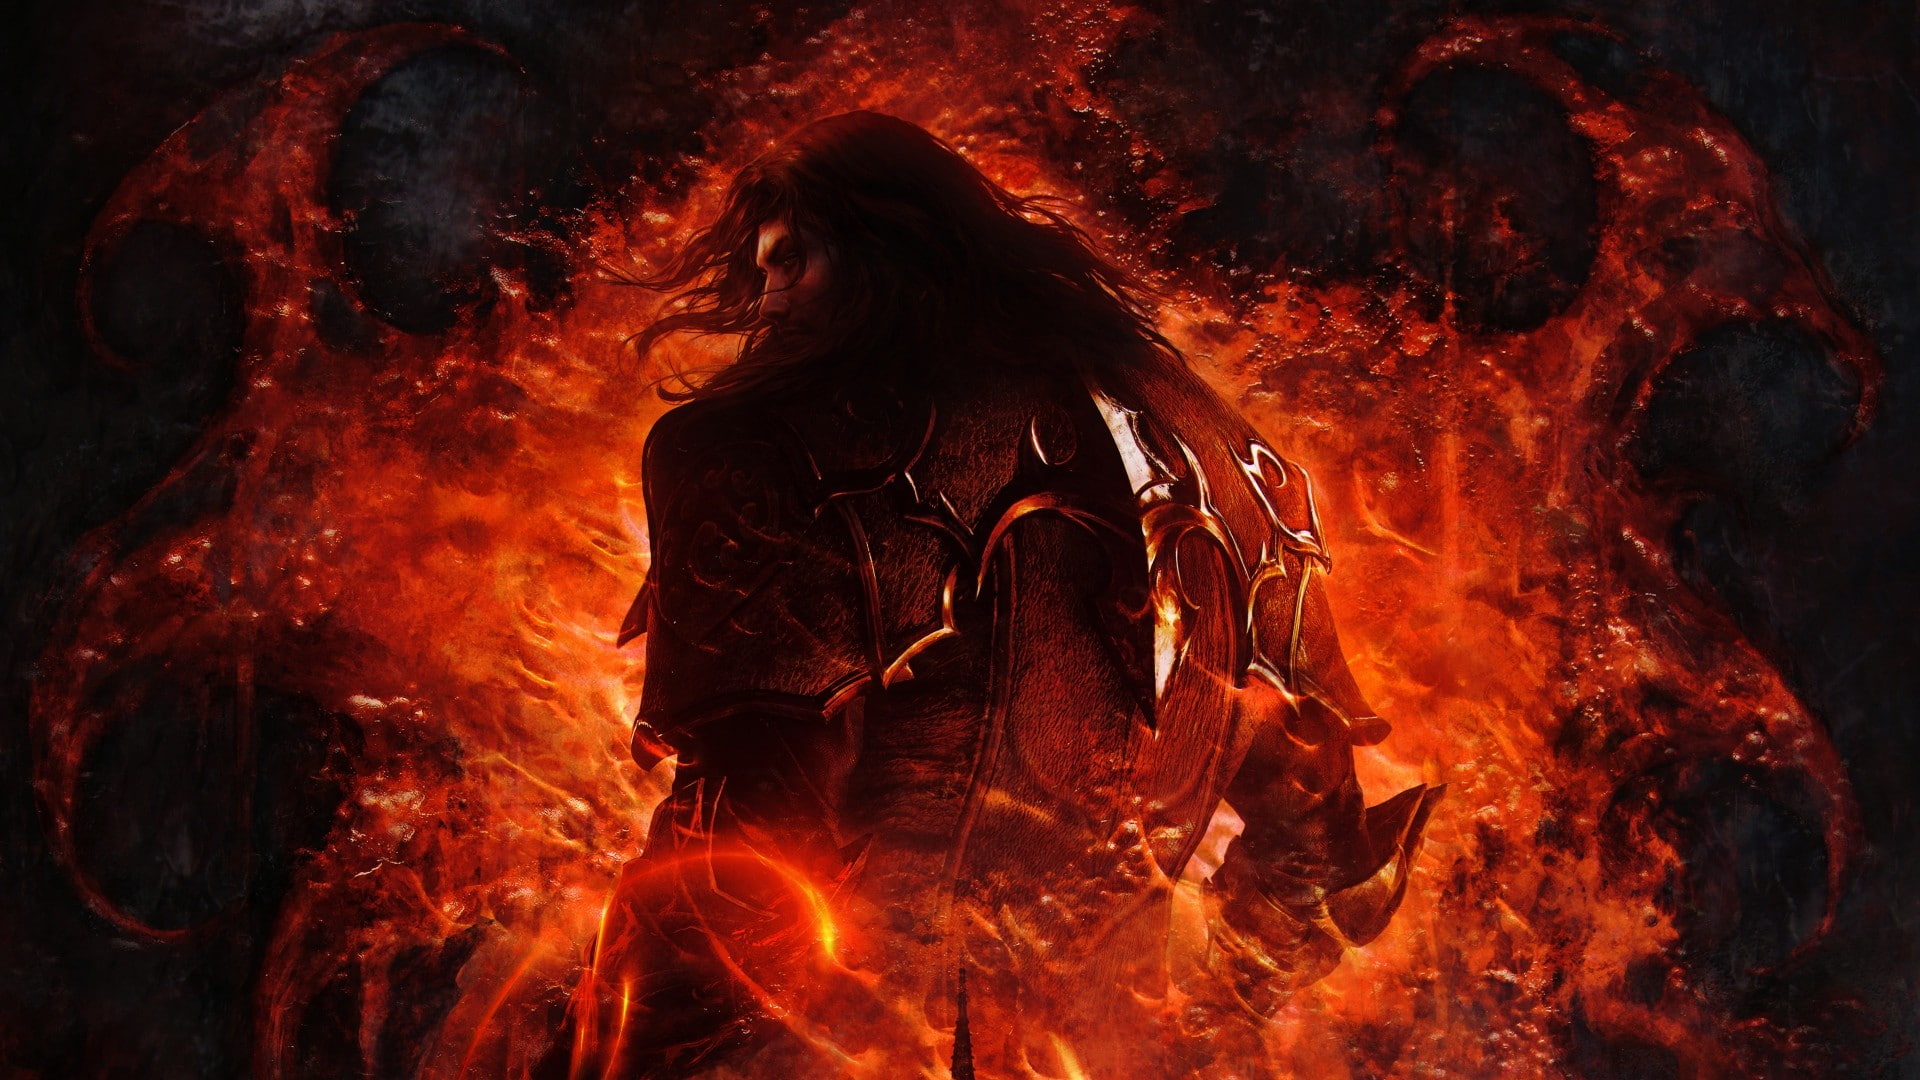 Castlevania, video games, Castlevania: Lords of Shadow 2, fire